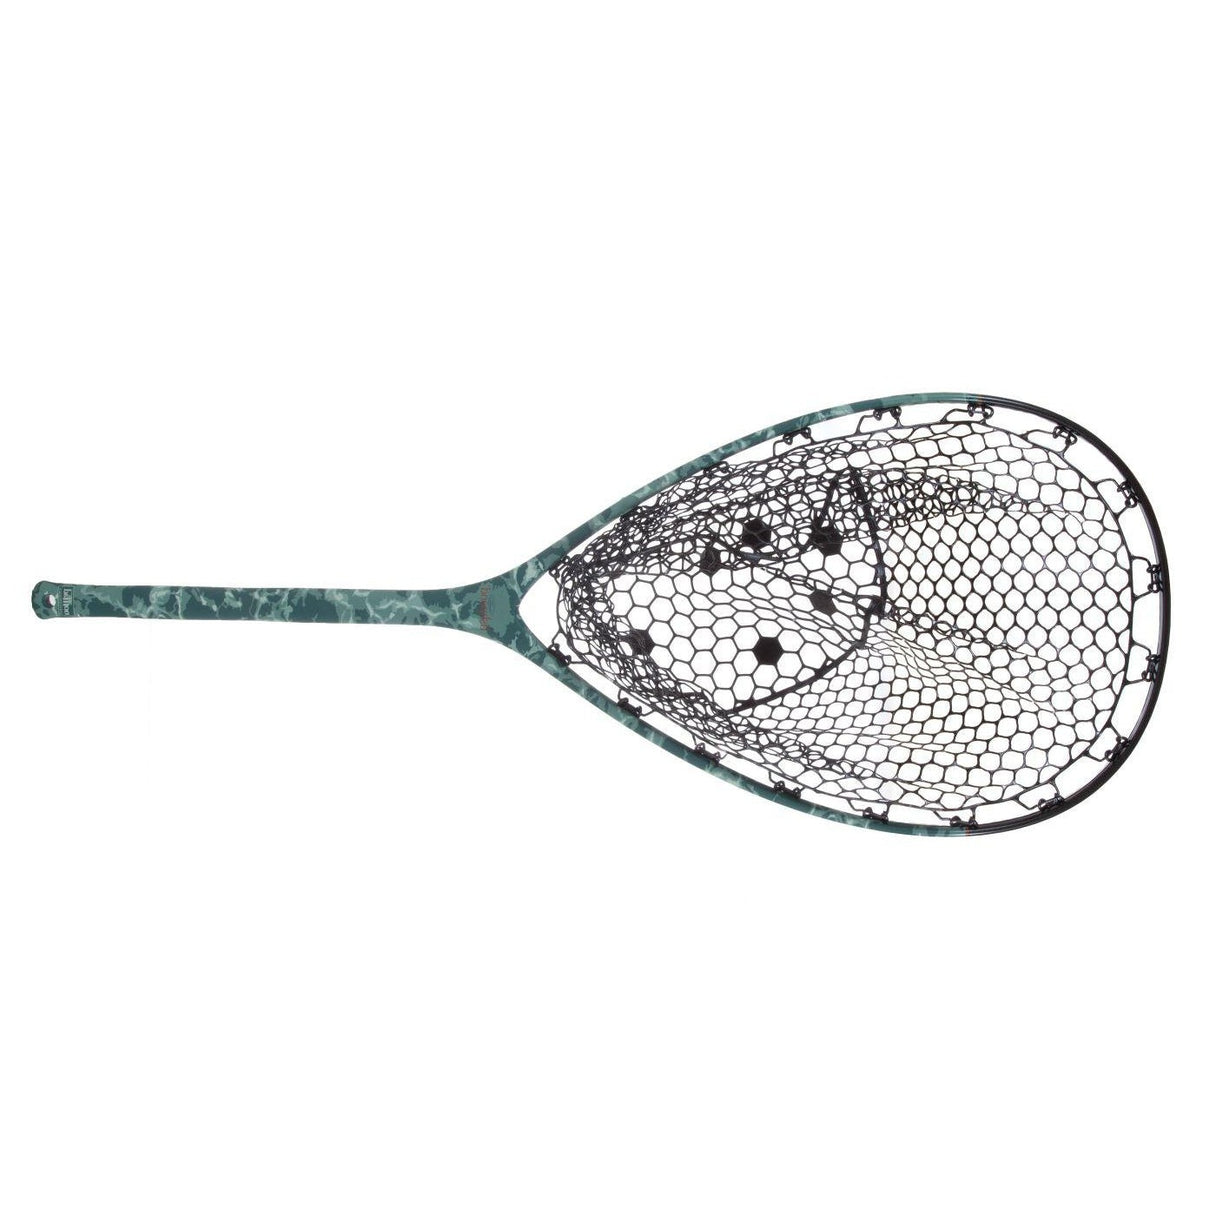 Fishpond Nomad Mid Length Boat Net (Salty Camo)